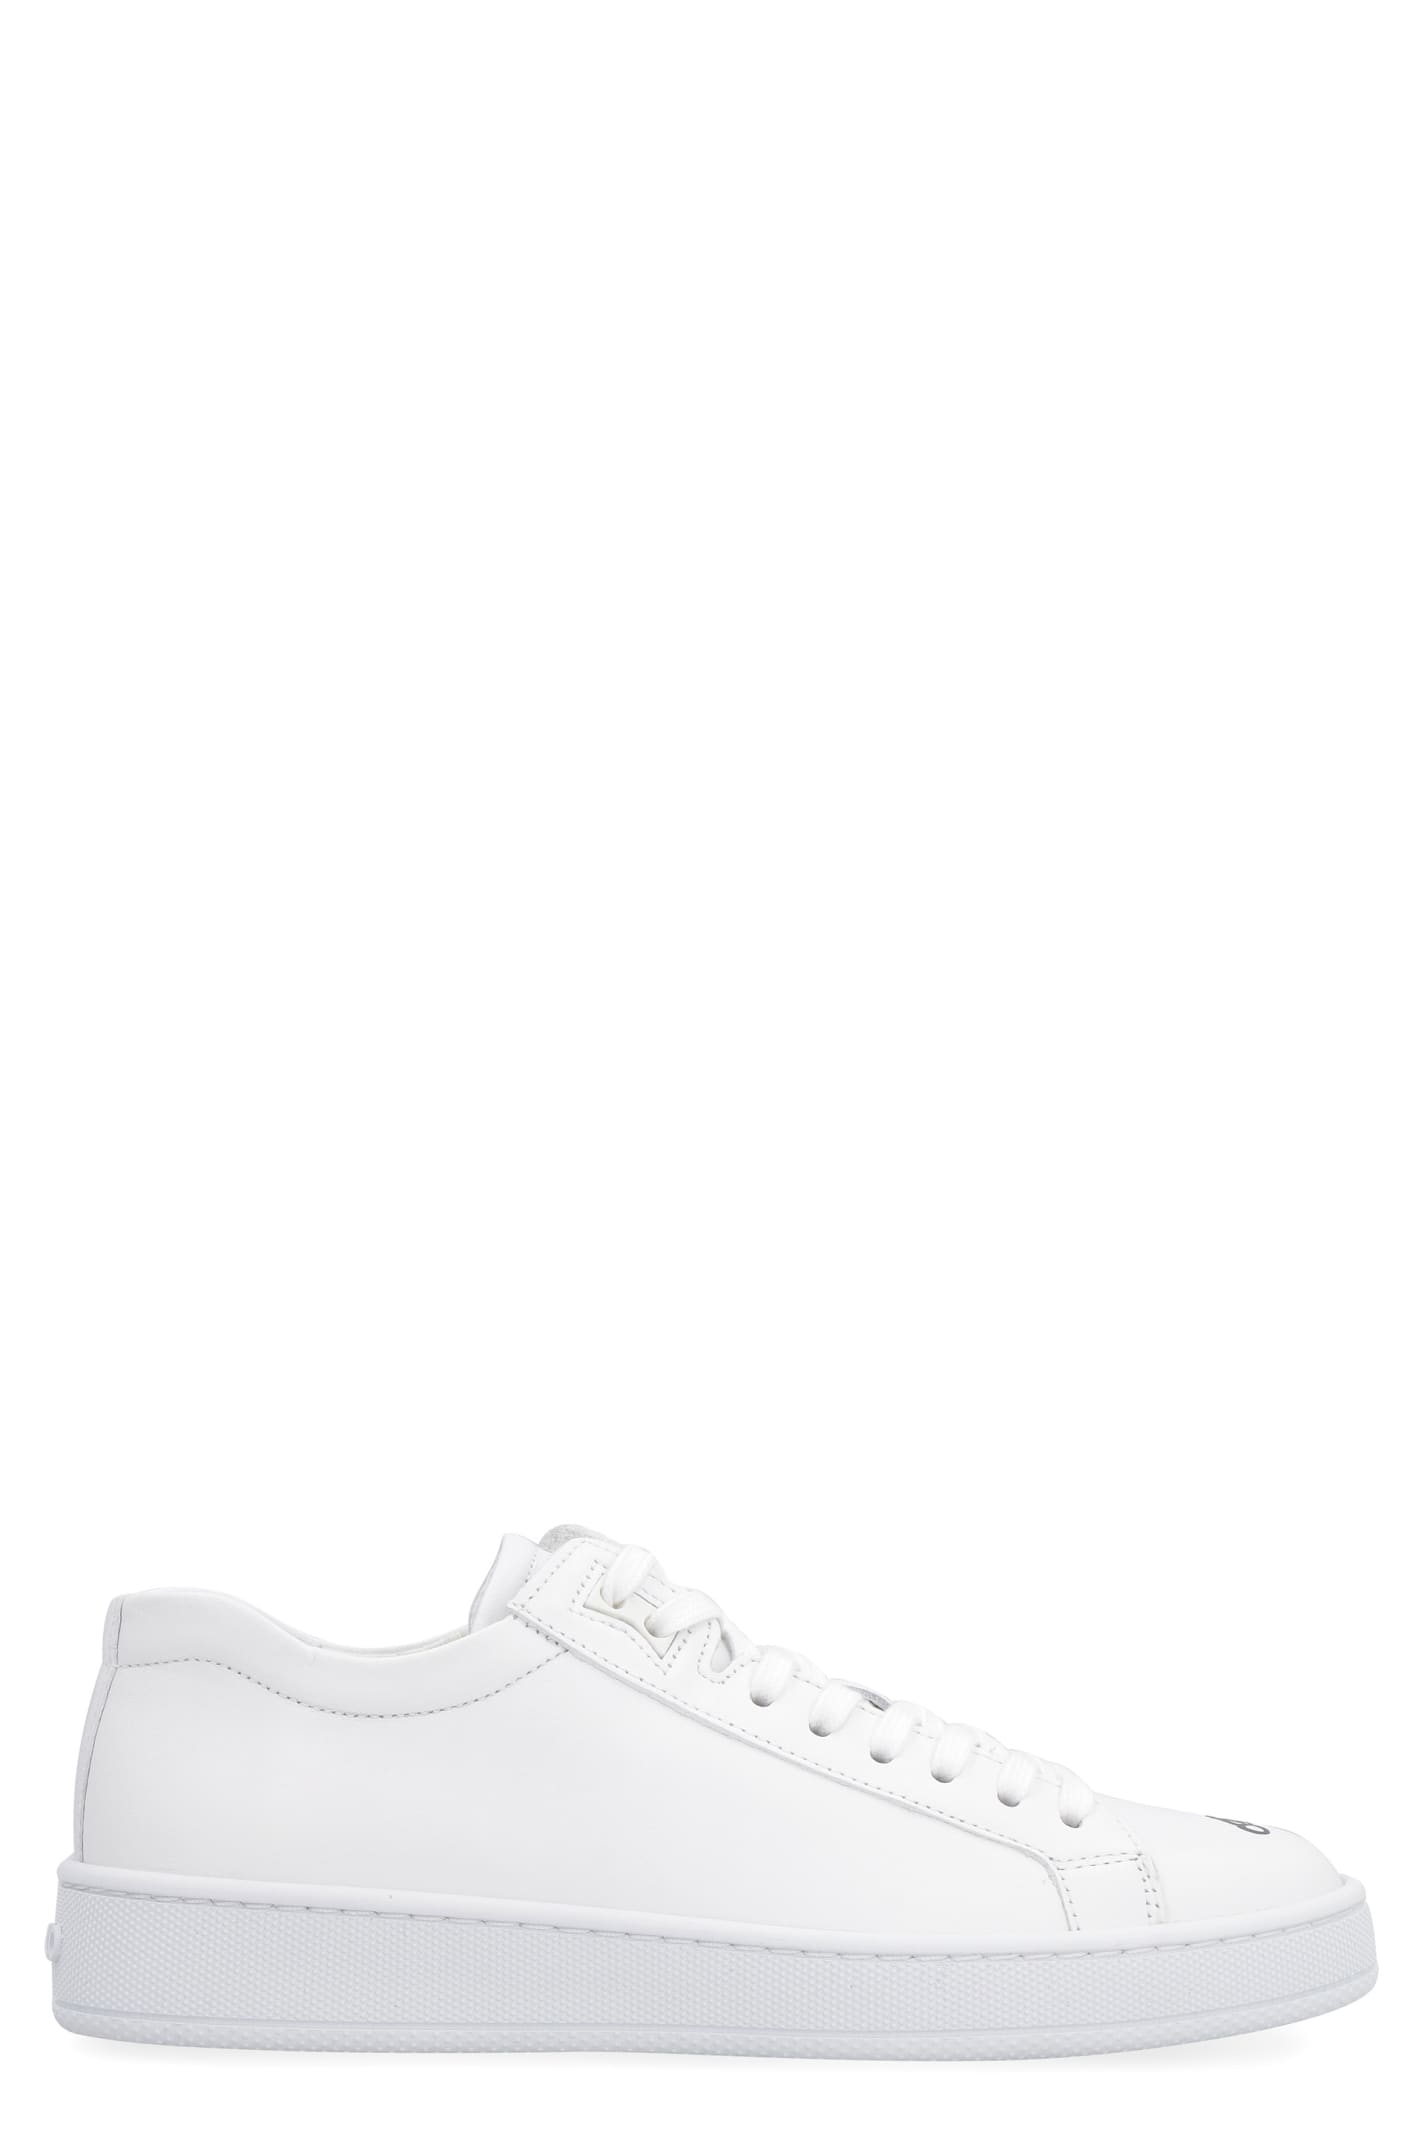 Kenzo Leather Low-top Sneakers